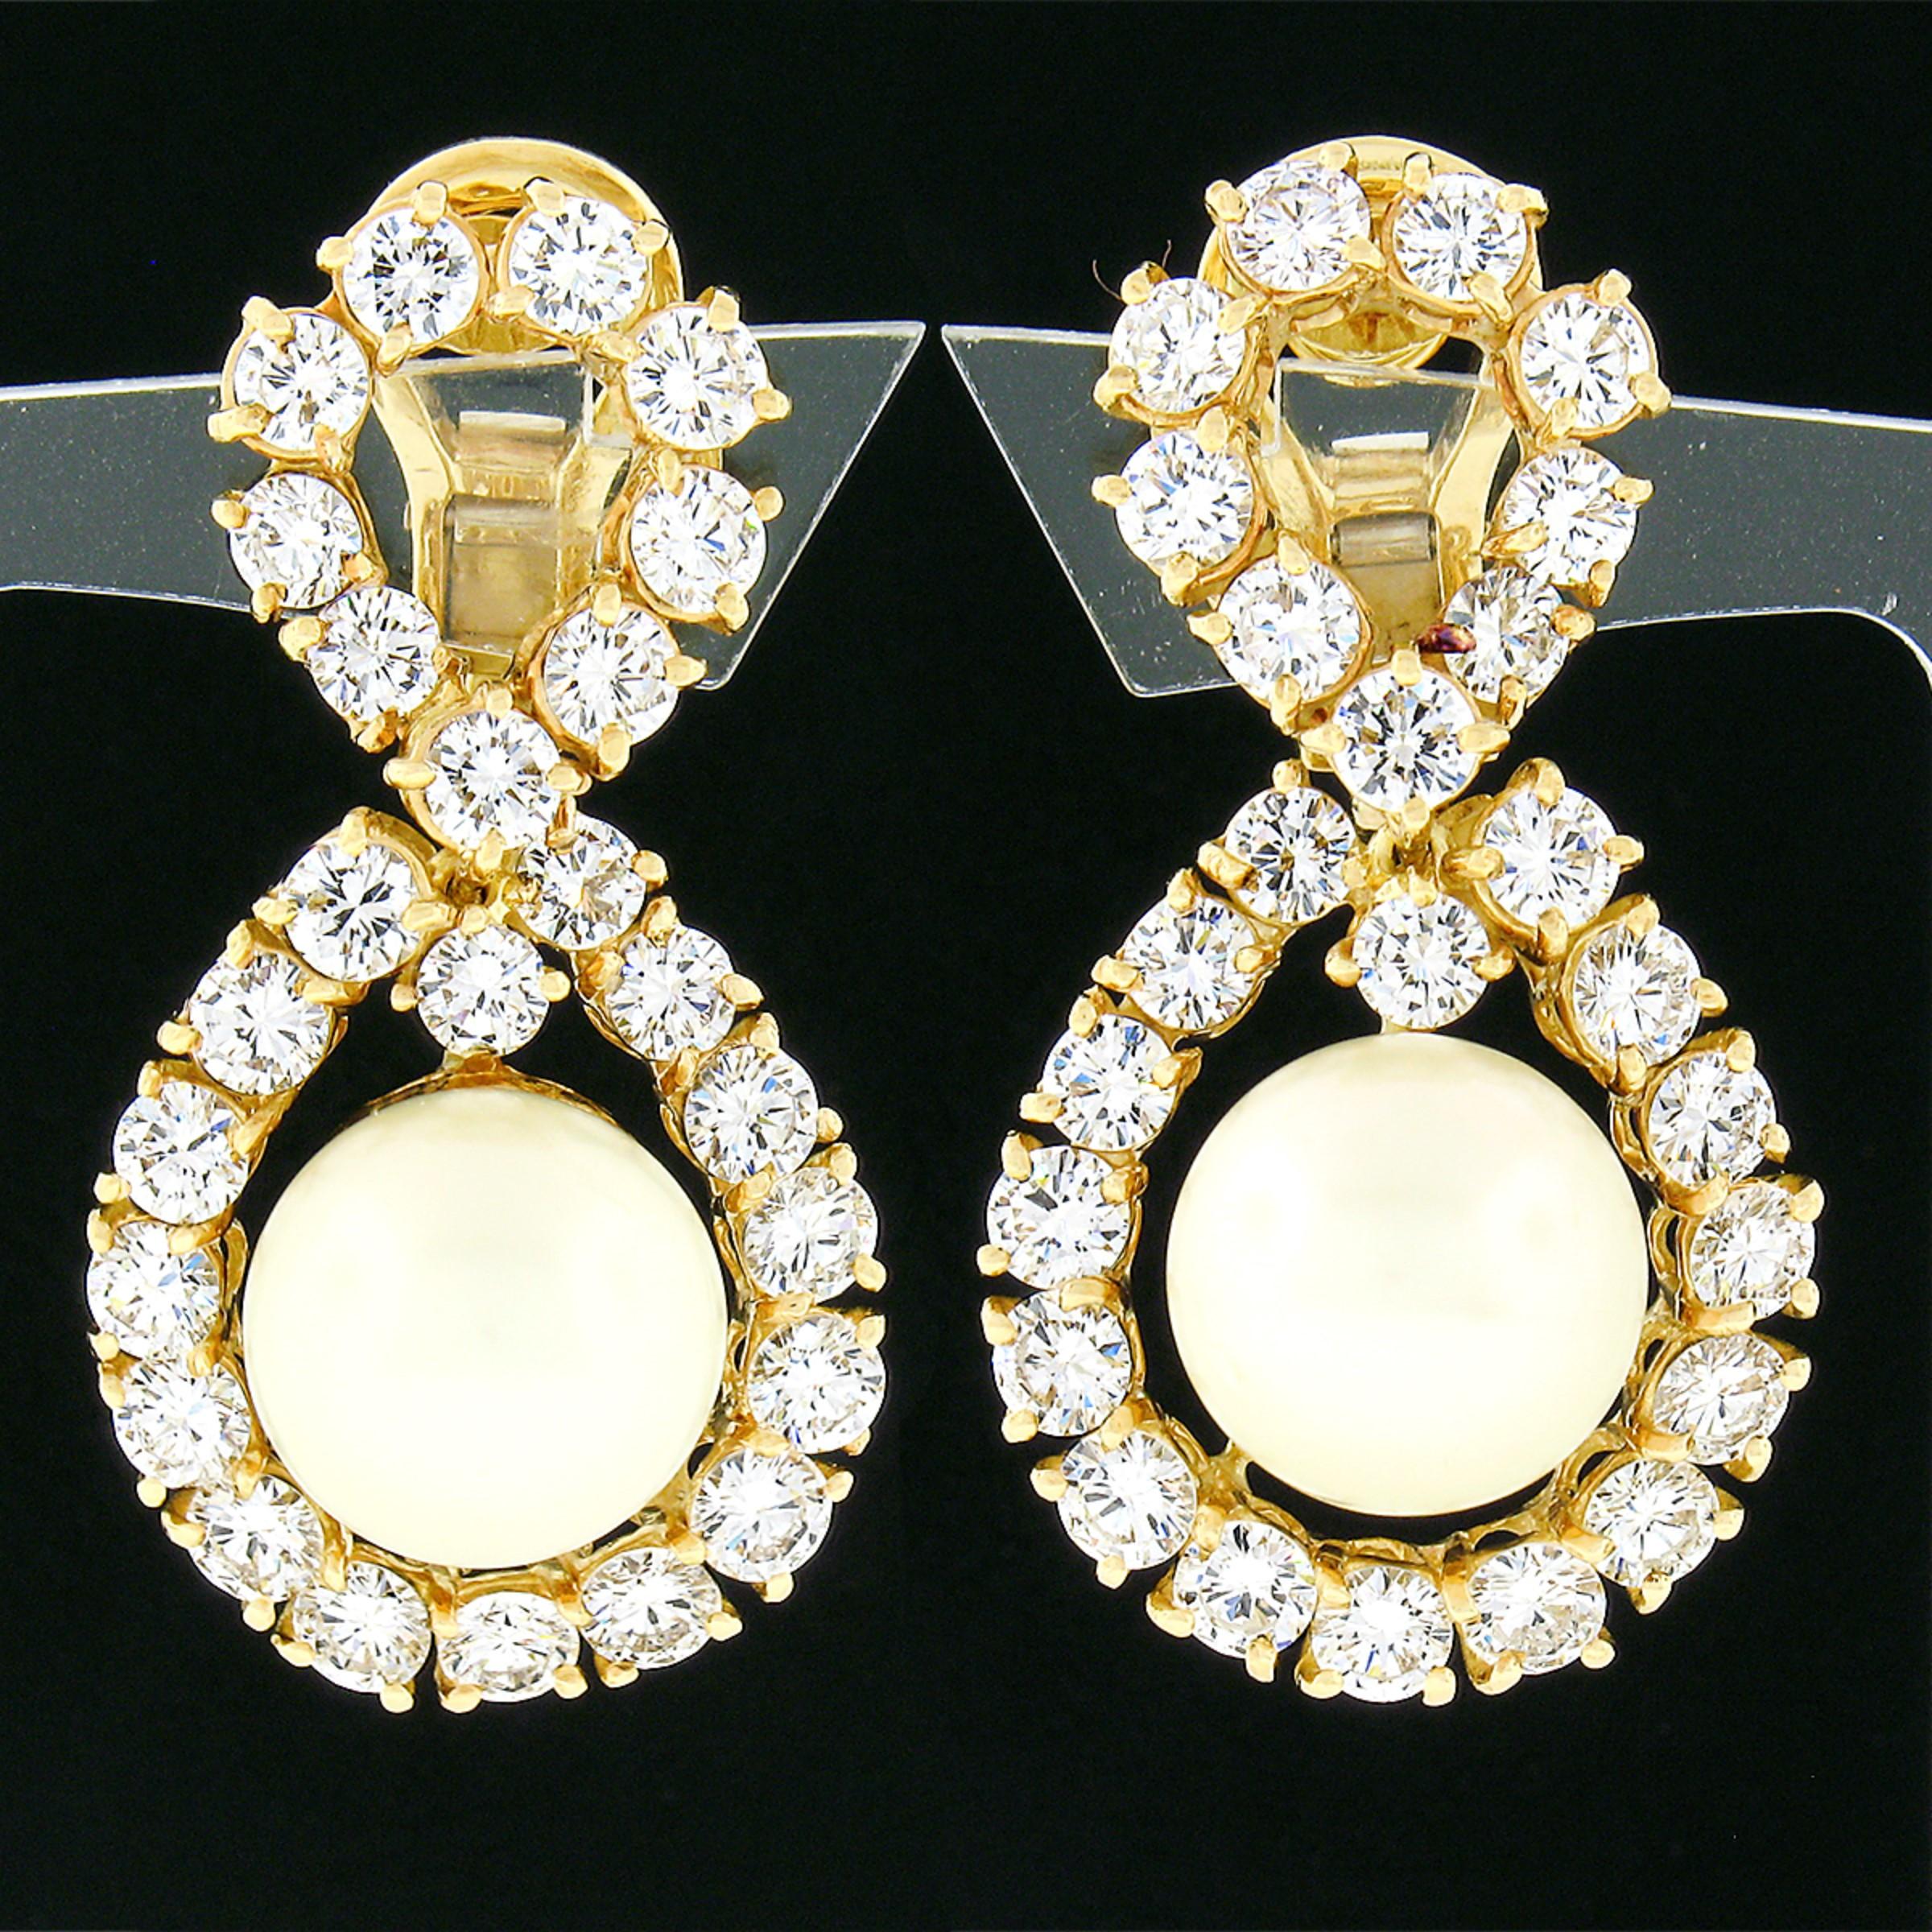 Here we have an incredibly designed pair of vintage earrings that were crafted from solid 18 yellow gold. They feature an elegant drop dangle style with a figure 8 or infinity design that is neatly set with very fine diamonds throughout with a